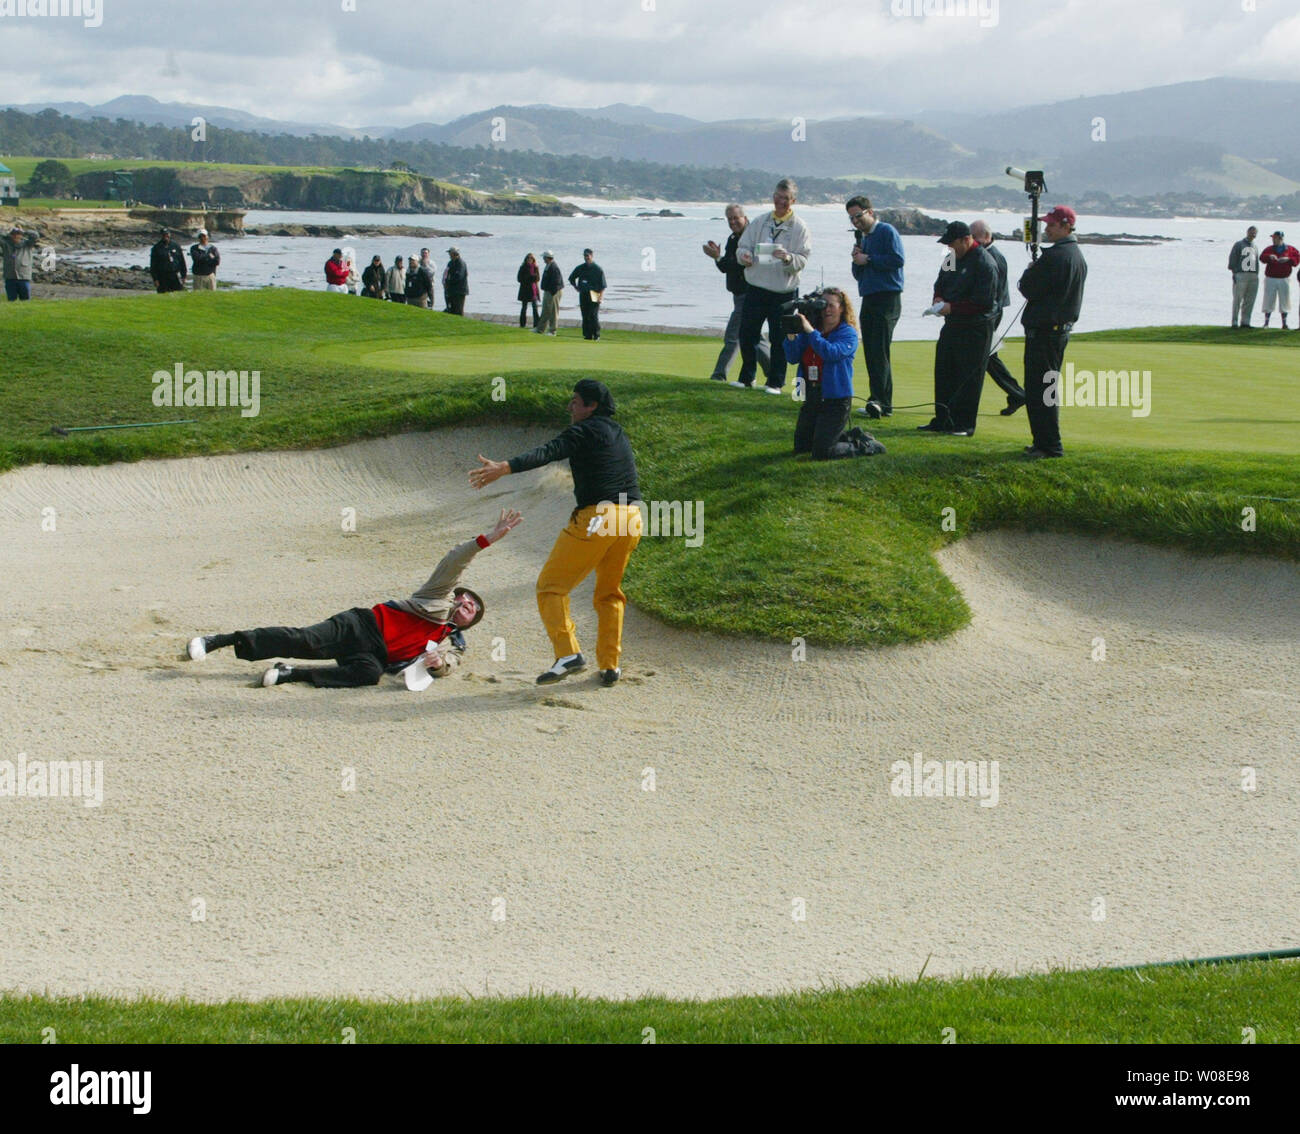 George Lopez drags sportscaster Bob Murphy into a sand trap on the 18th green  during a celebrity golf challenge February 4, 2004 at Pebble Beach, CA.    (UPI PHOTO/TERRY SCHMITT) Stock Photo